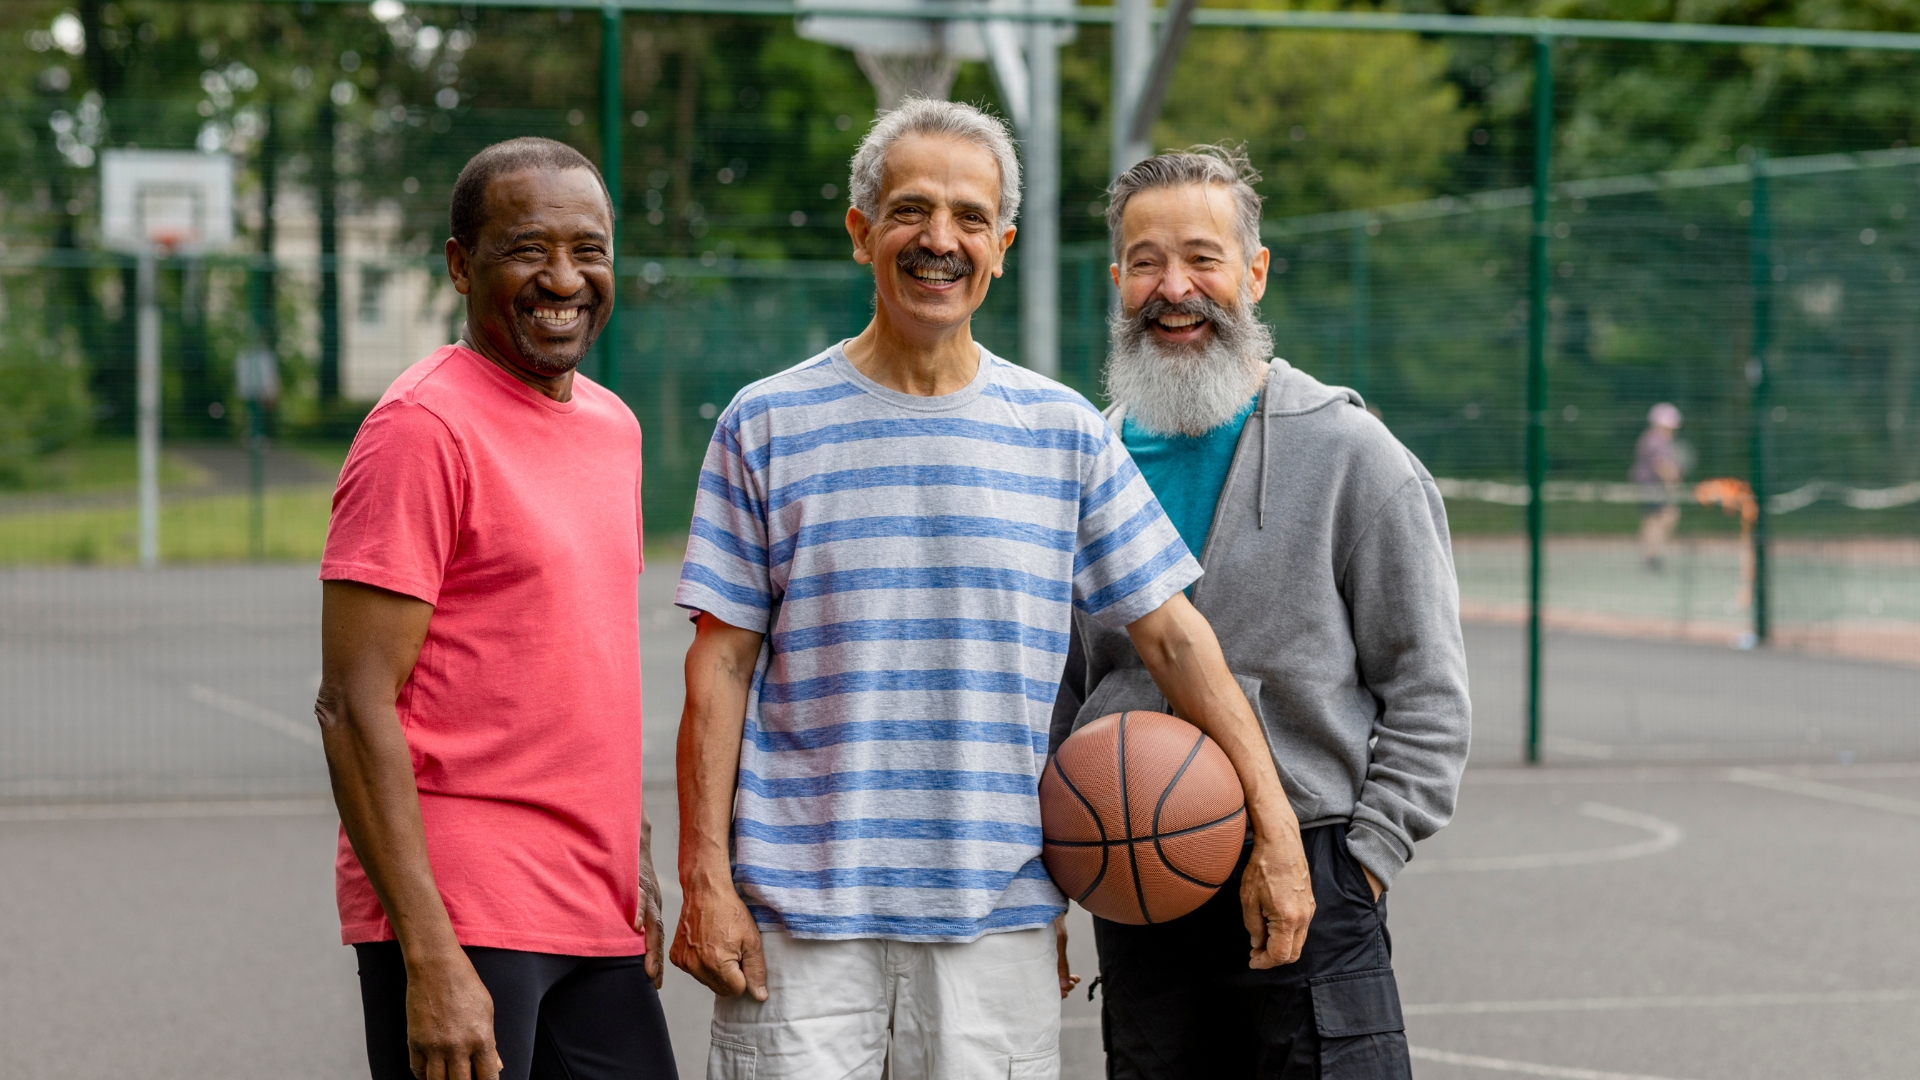 Three older men are standing on the basketball court. The one in the middle is holding a basketball.